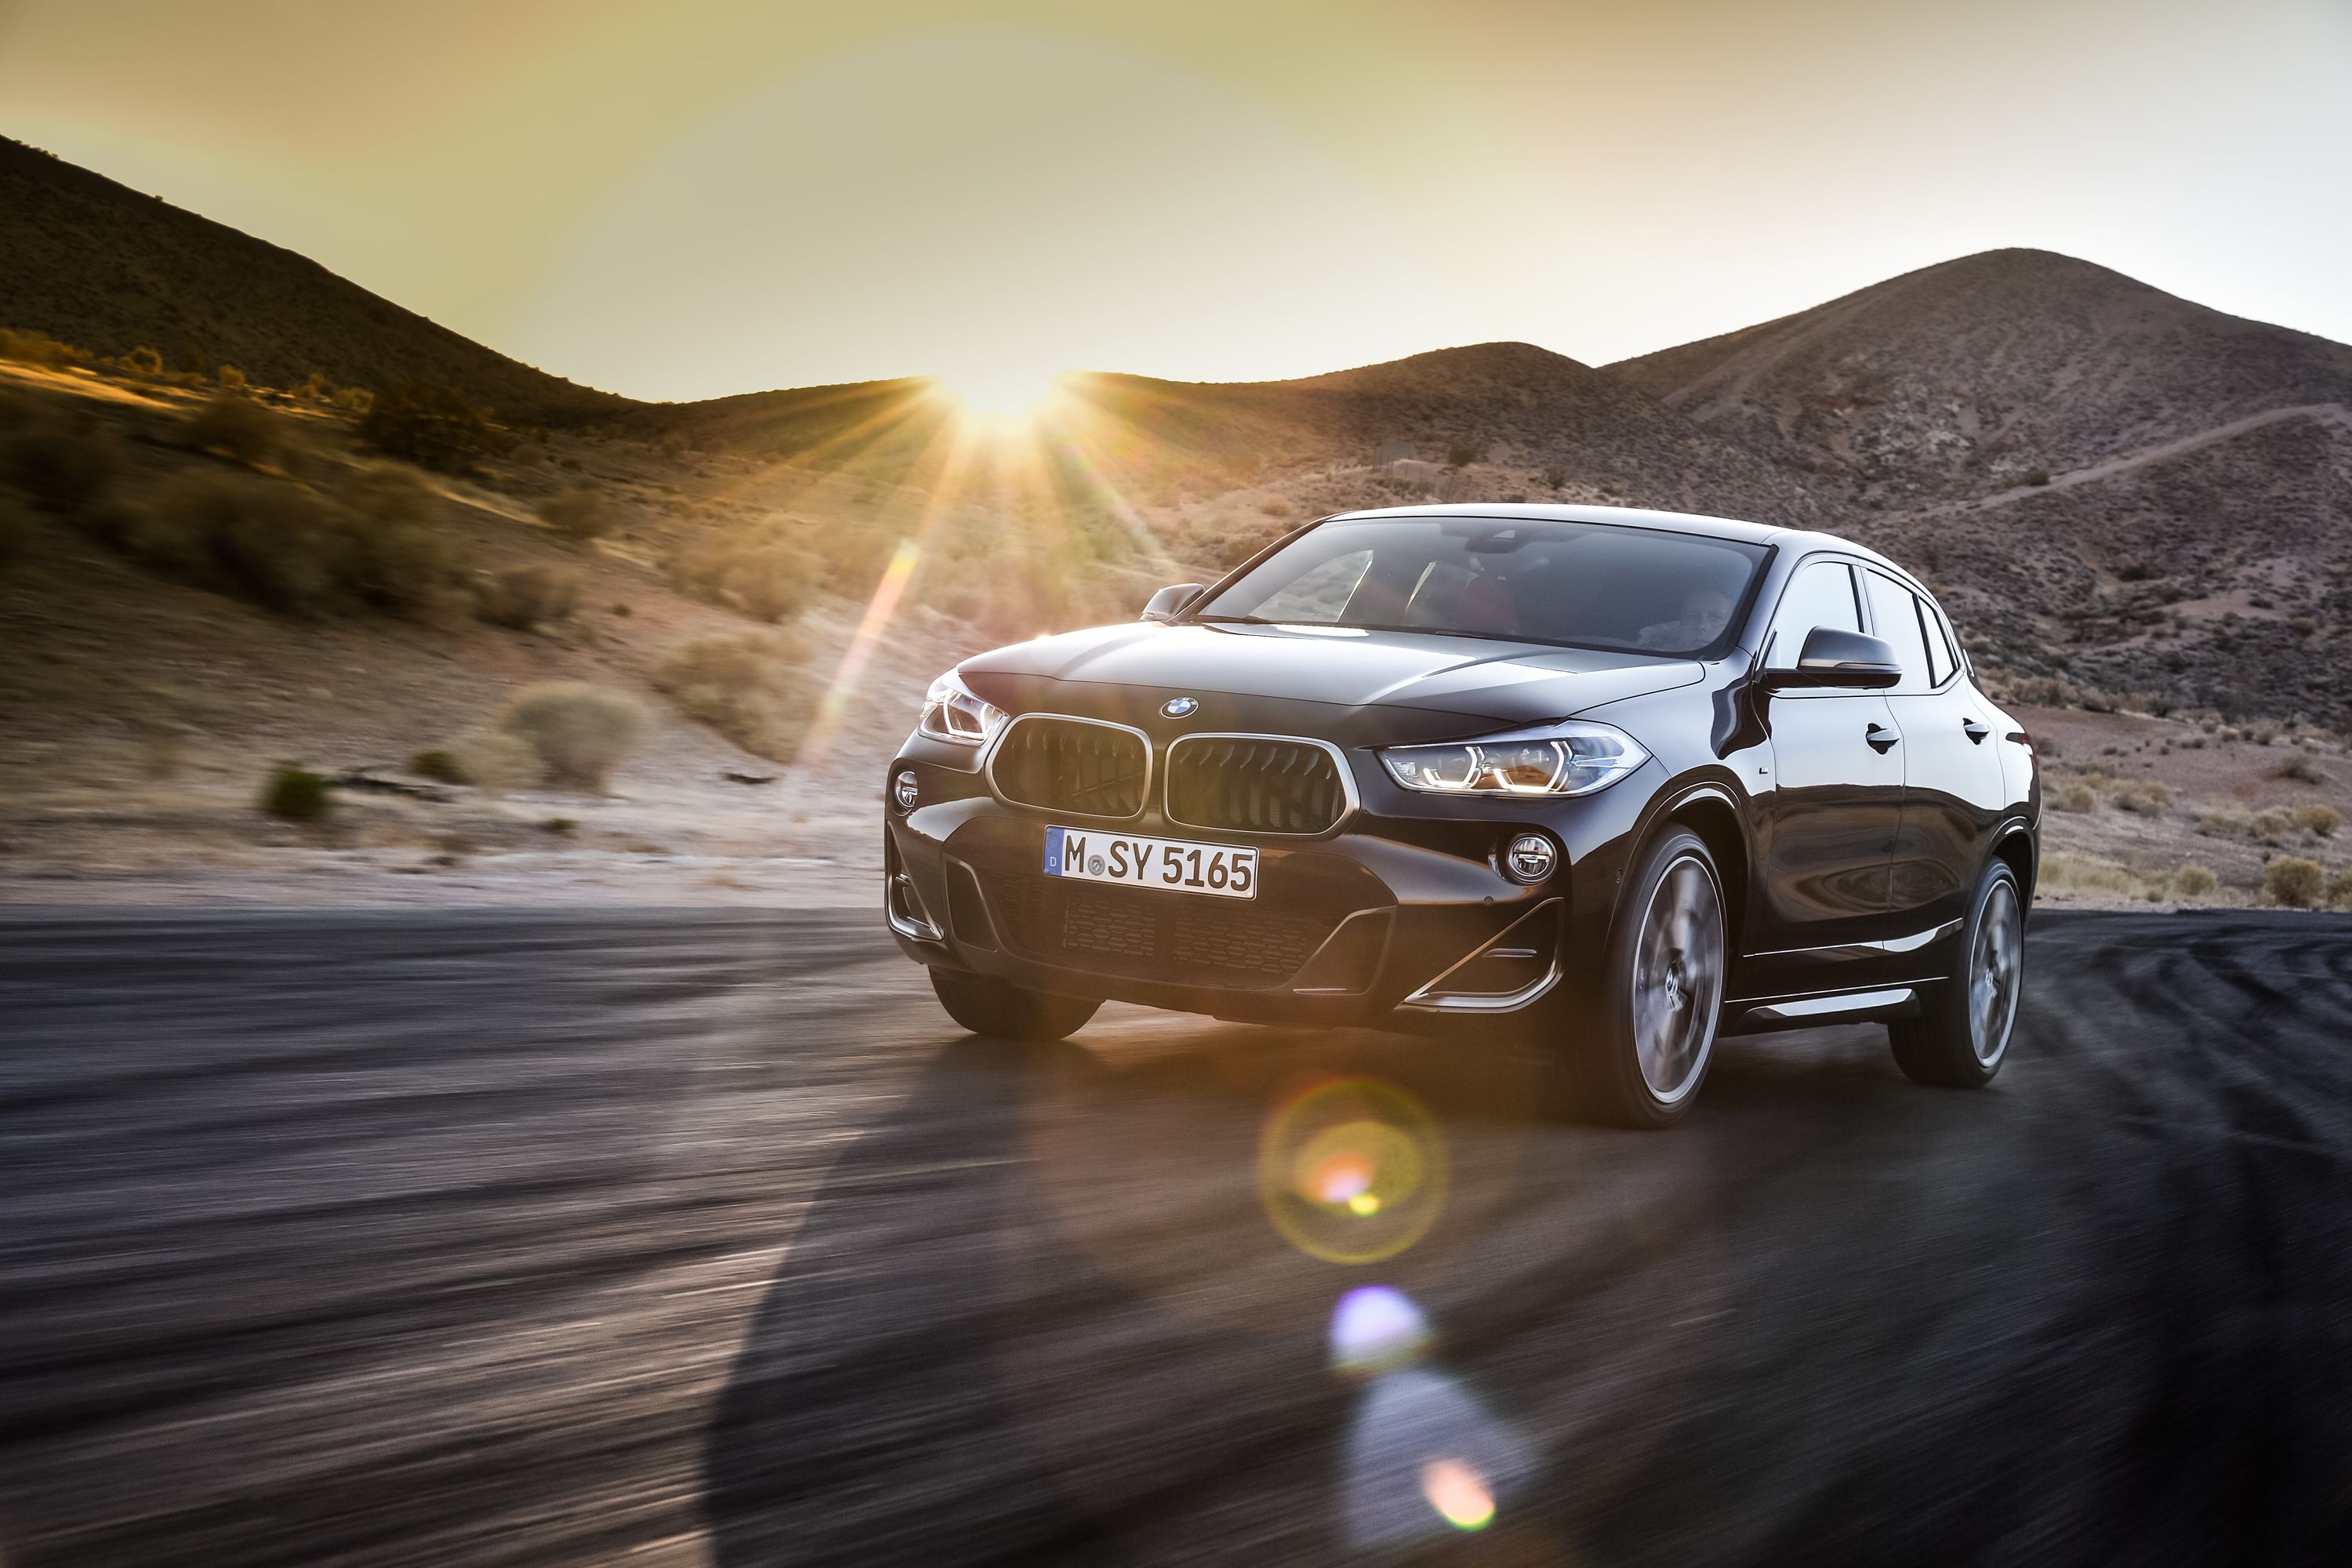 BMW's most-powerful four-cylinder is going in its X2 M35i crossover